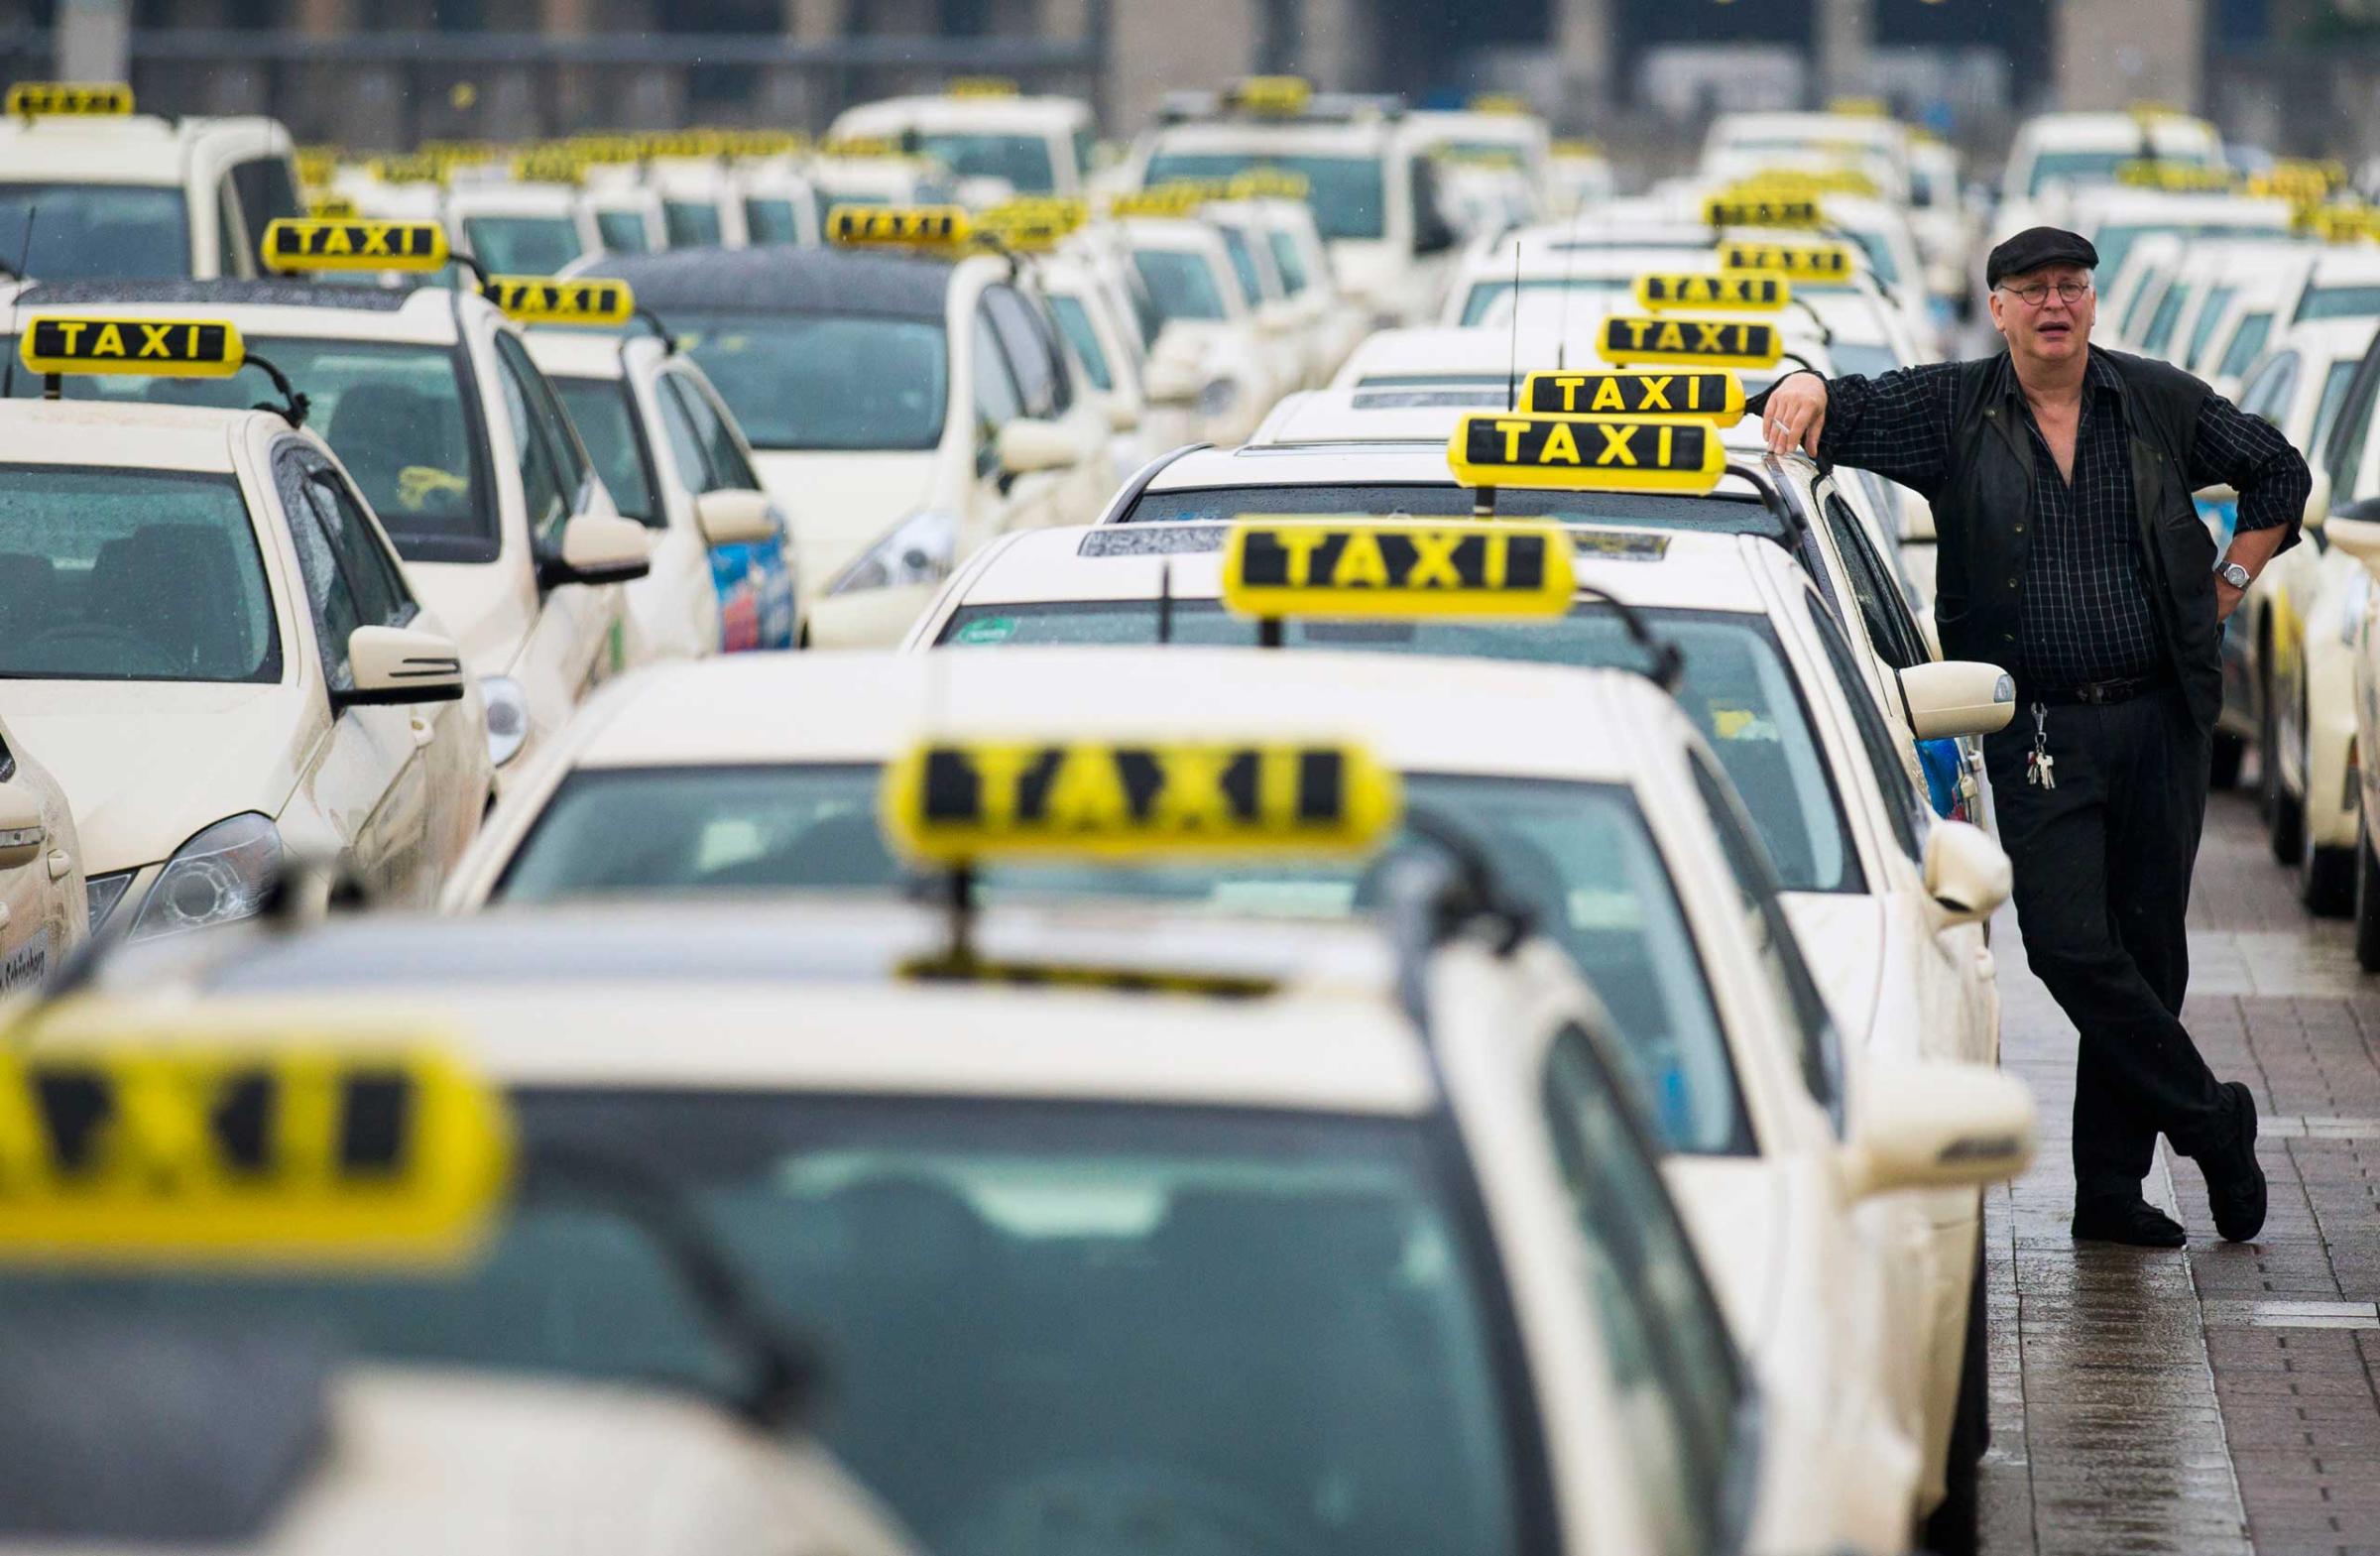 A taxi driver listens to speeches by his colleagues, during an Europe-wide protest of licensed taxi drivers against taxi hailing apps that are feared to flush unregulated private drivers into the market, in front of the Olympic stadium in Berlin on June 11, 2014.